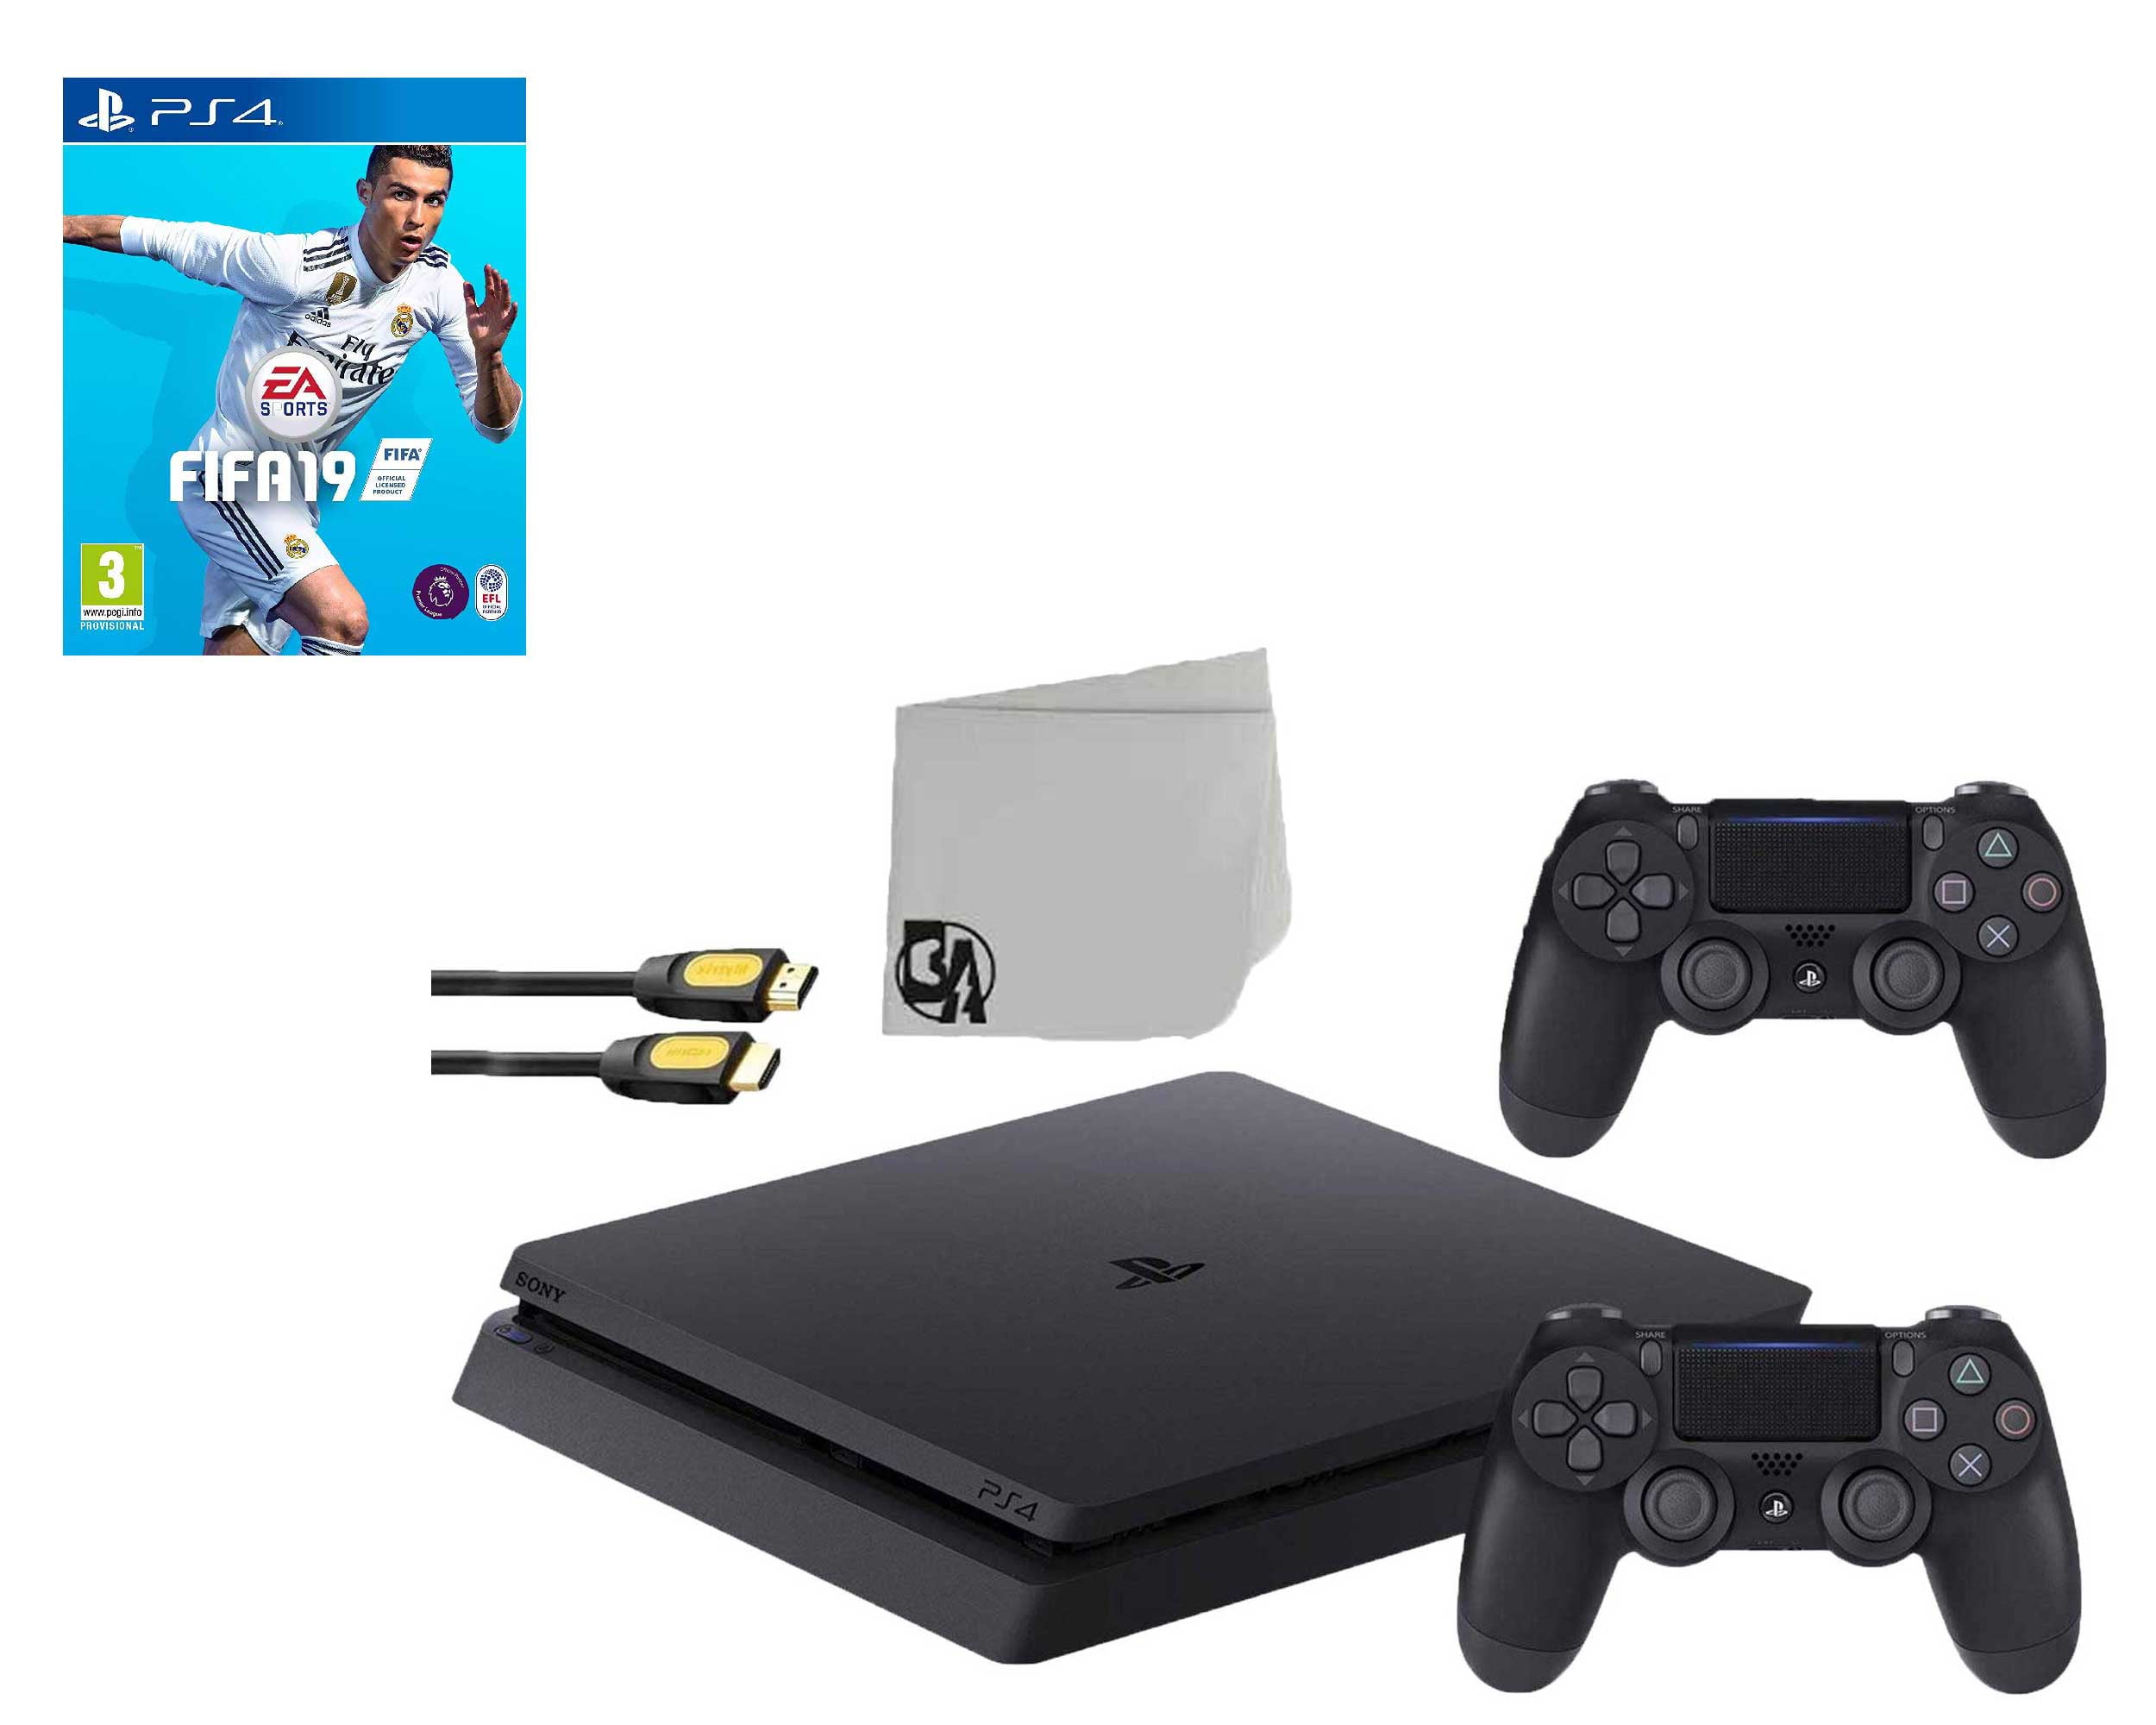 Sony 2215A PlayStation 4 Slim 500GB Gaming Console 2 Controller Included with Game BOLT AXTION Bundle Lke New - Walmart.com